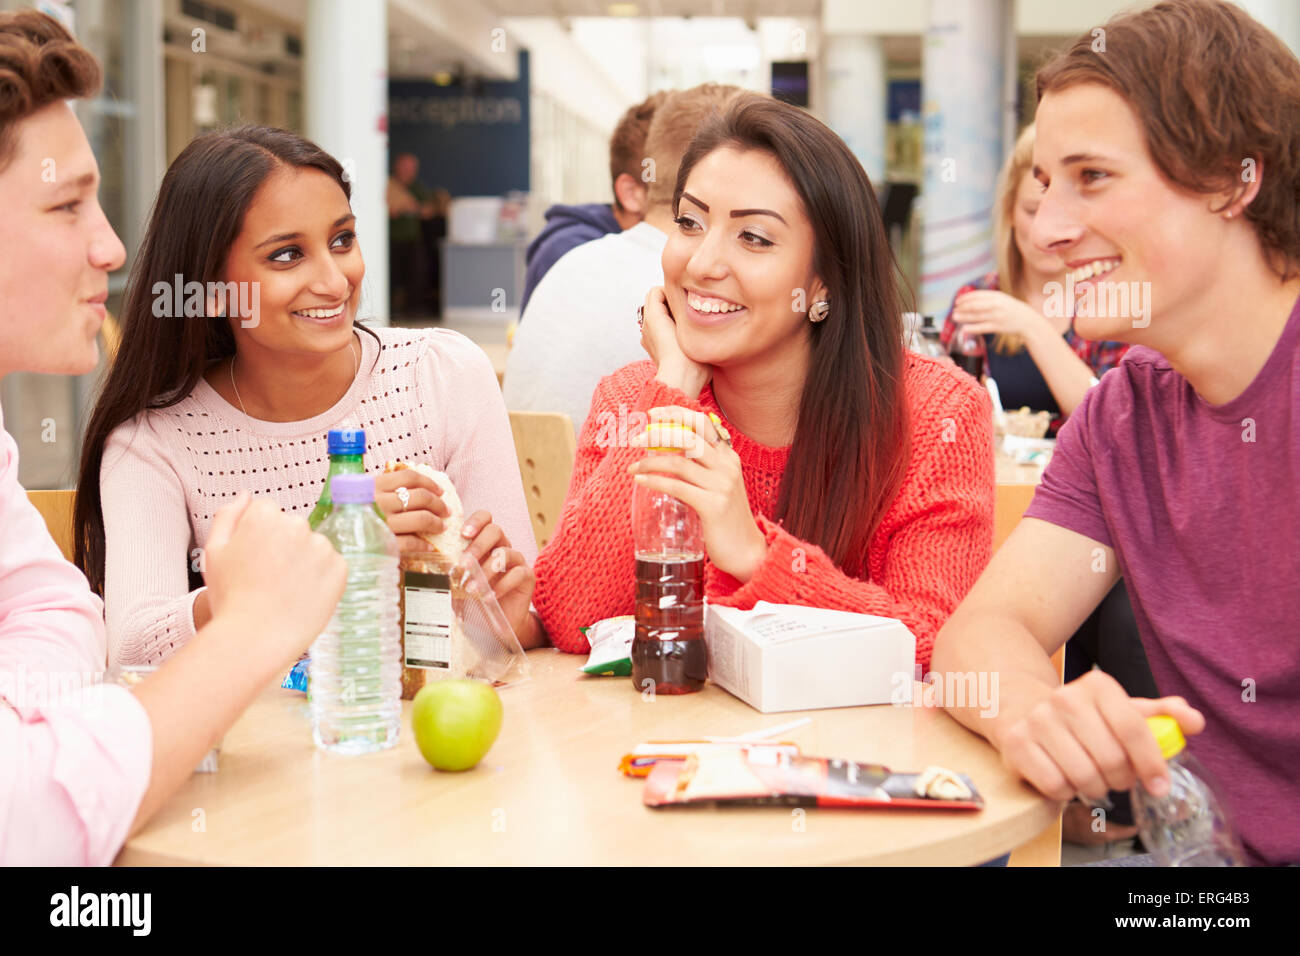 Group Of College Students Eating Lunch Together Stock Photo